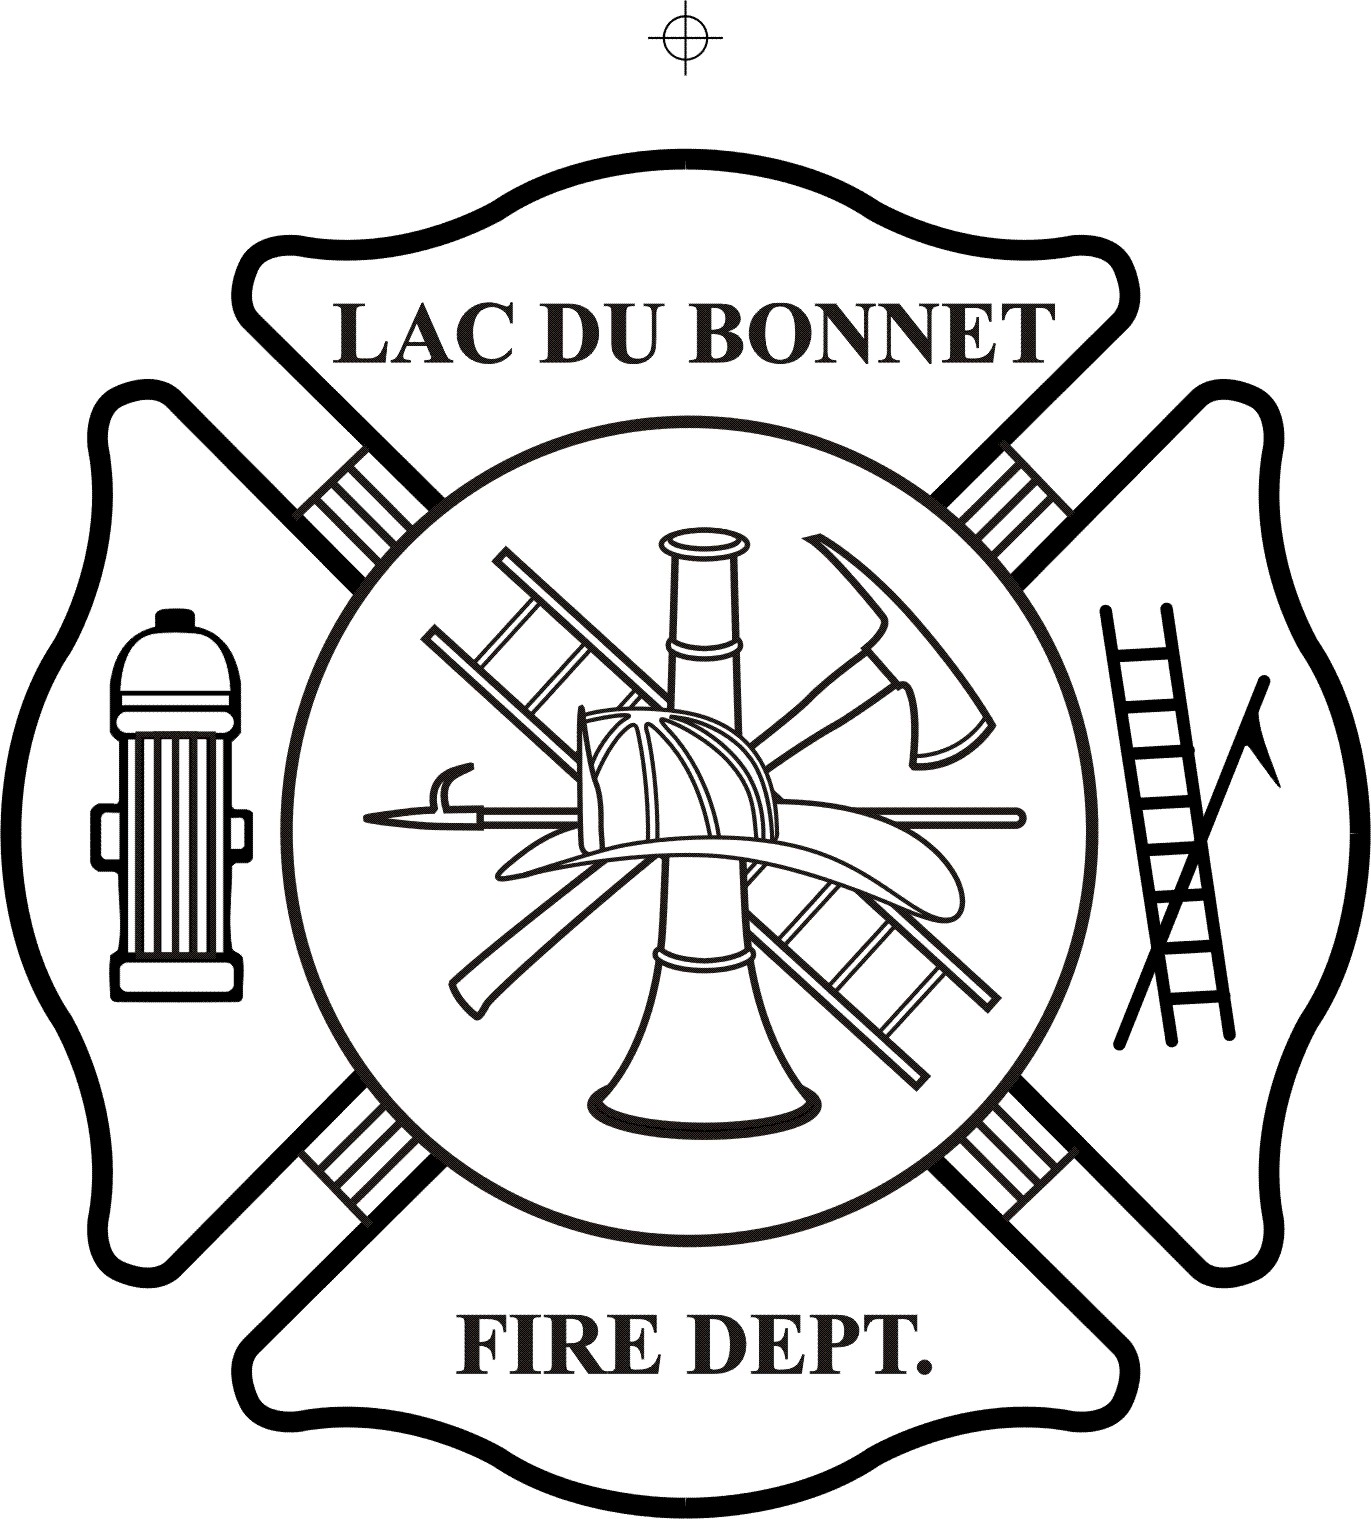 Fire department seal clipart.